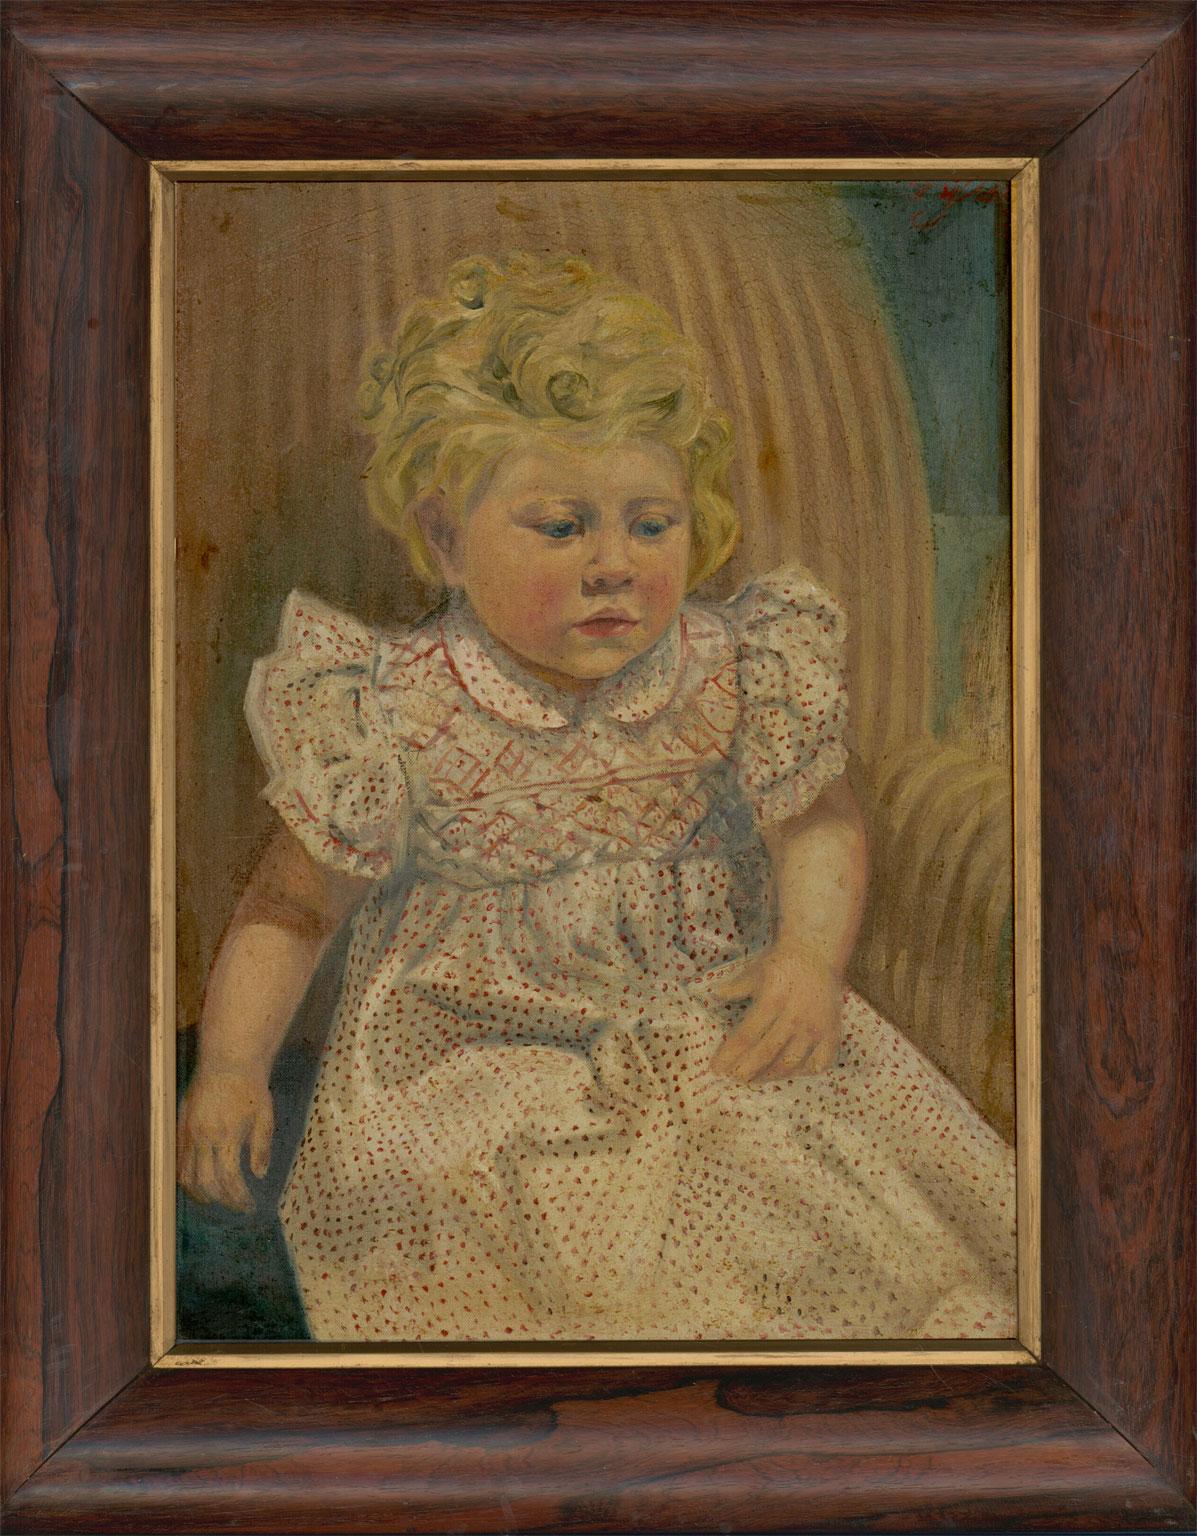 Unknown Portrait Painting - Fine Framed 20th Century Oil - Seated Girl in Smock